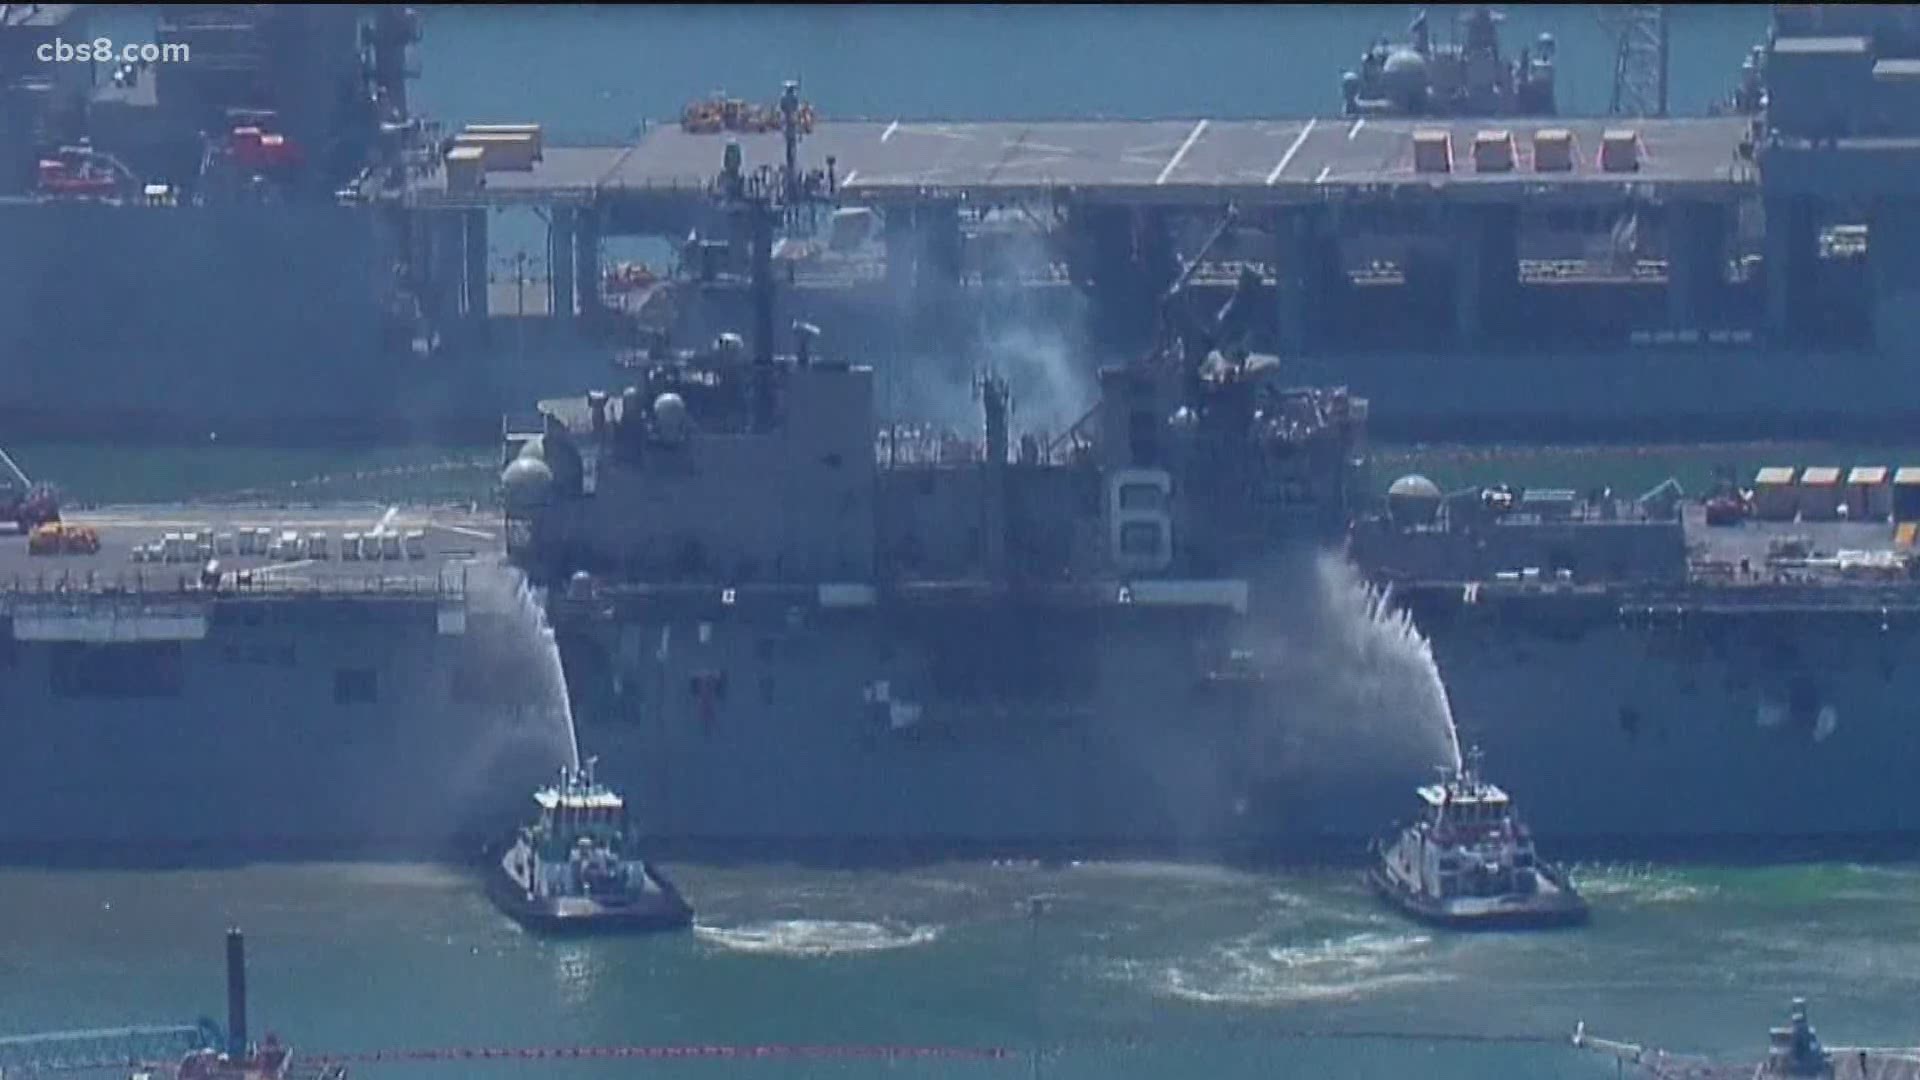 Despite the destructiveness of the out-of-control fire, Navy officials reported late Tuesday morning that the vessel appeared to have escaped irreparable harm.